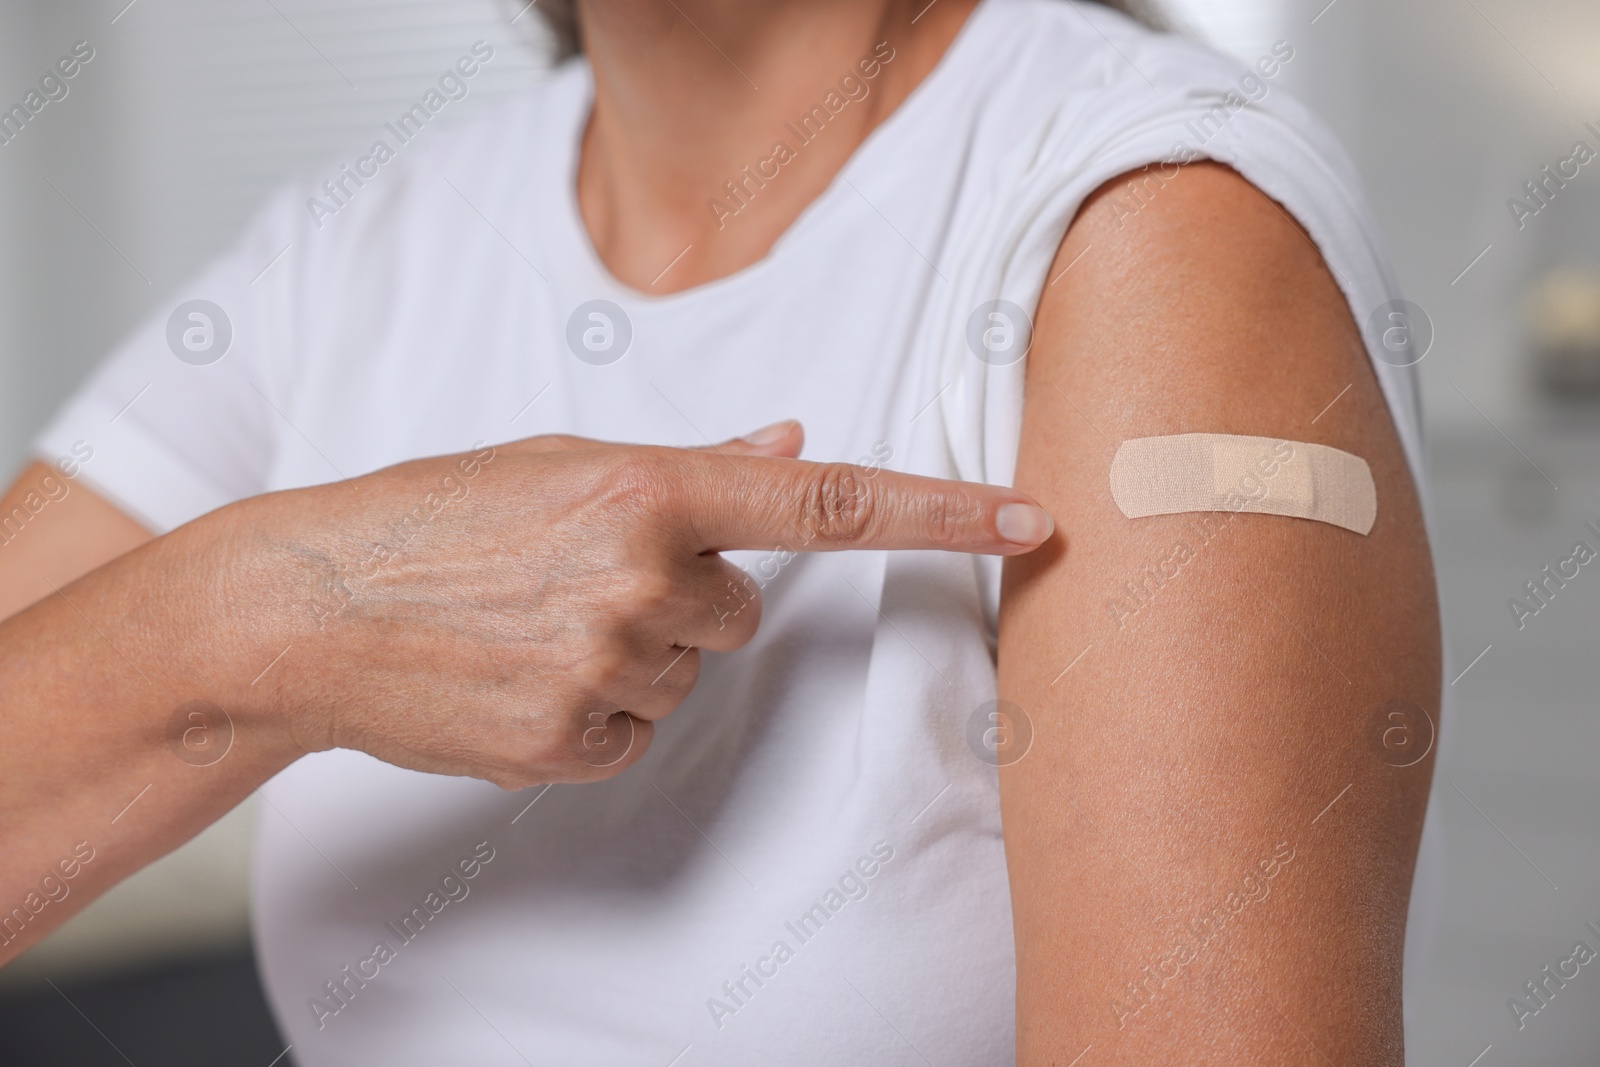 Photo of Woman pointing at adhesive bandage after vaccination against blurred background, closeup